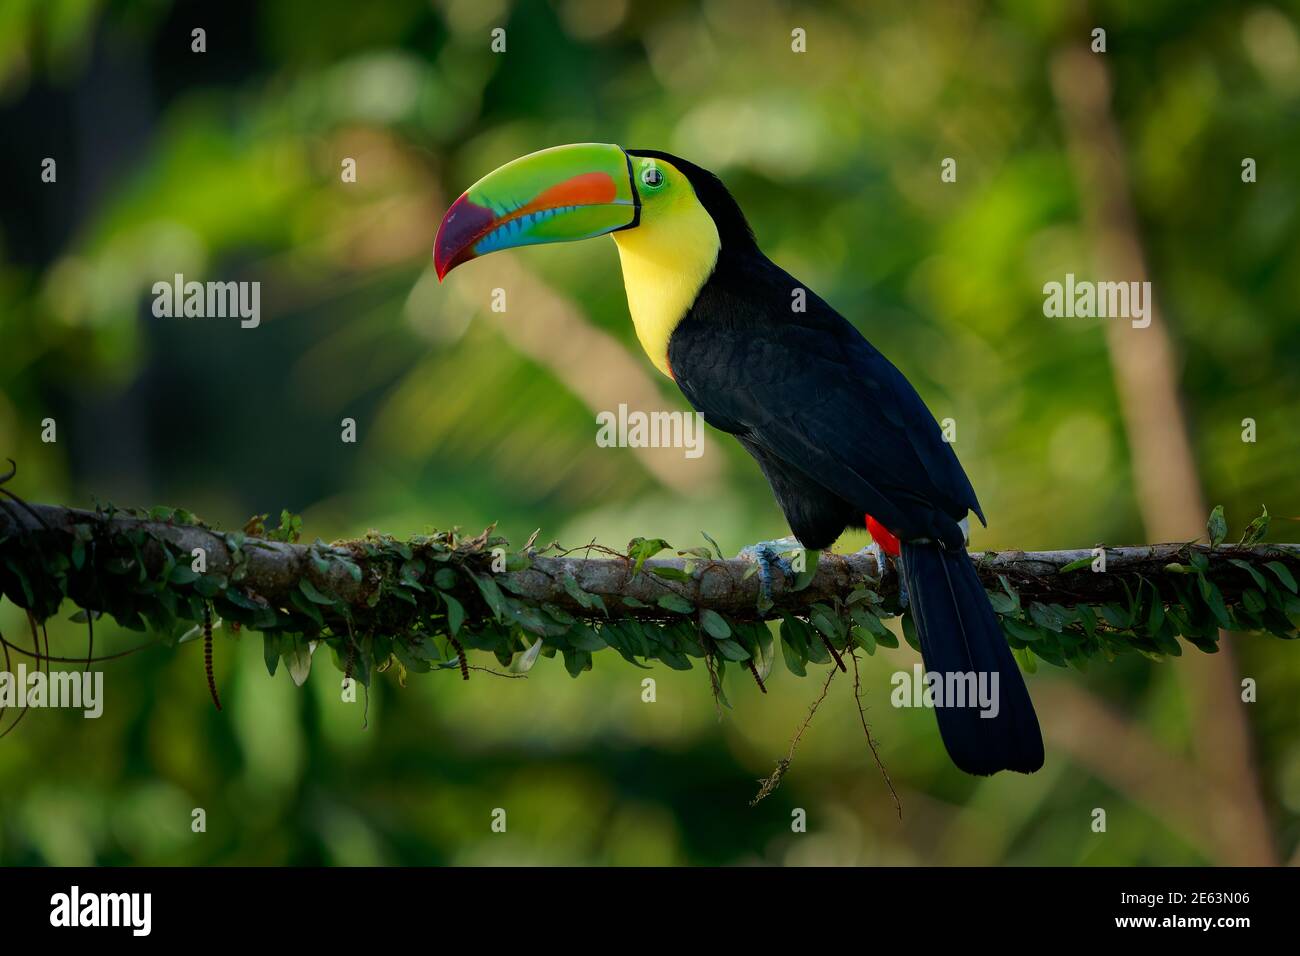 Keel-billed Toucan - Ramphastos sulfuratus  also known as sulfur-breasted toucan or rainbow-billed toucan, Latin American colourful bird, national bir Stock Photo